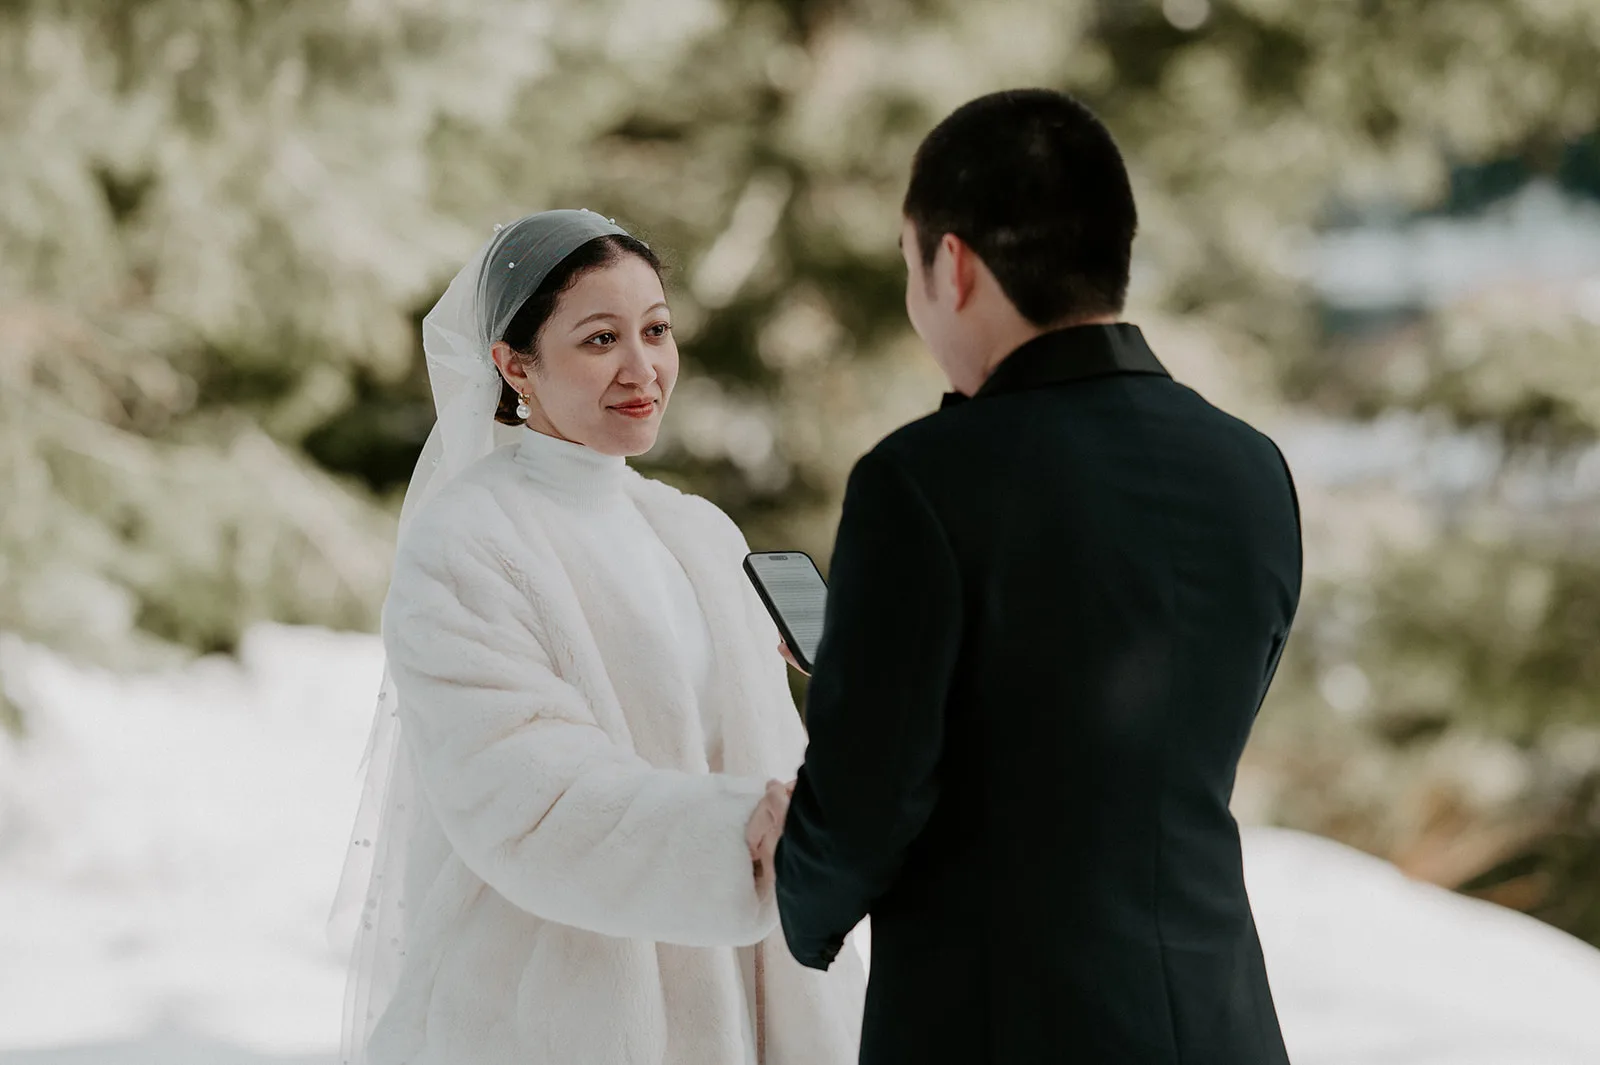 Bride exchanging vows with her groom in an intimate snowy elopement.